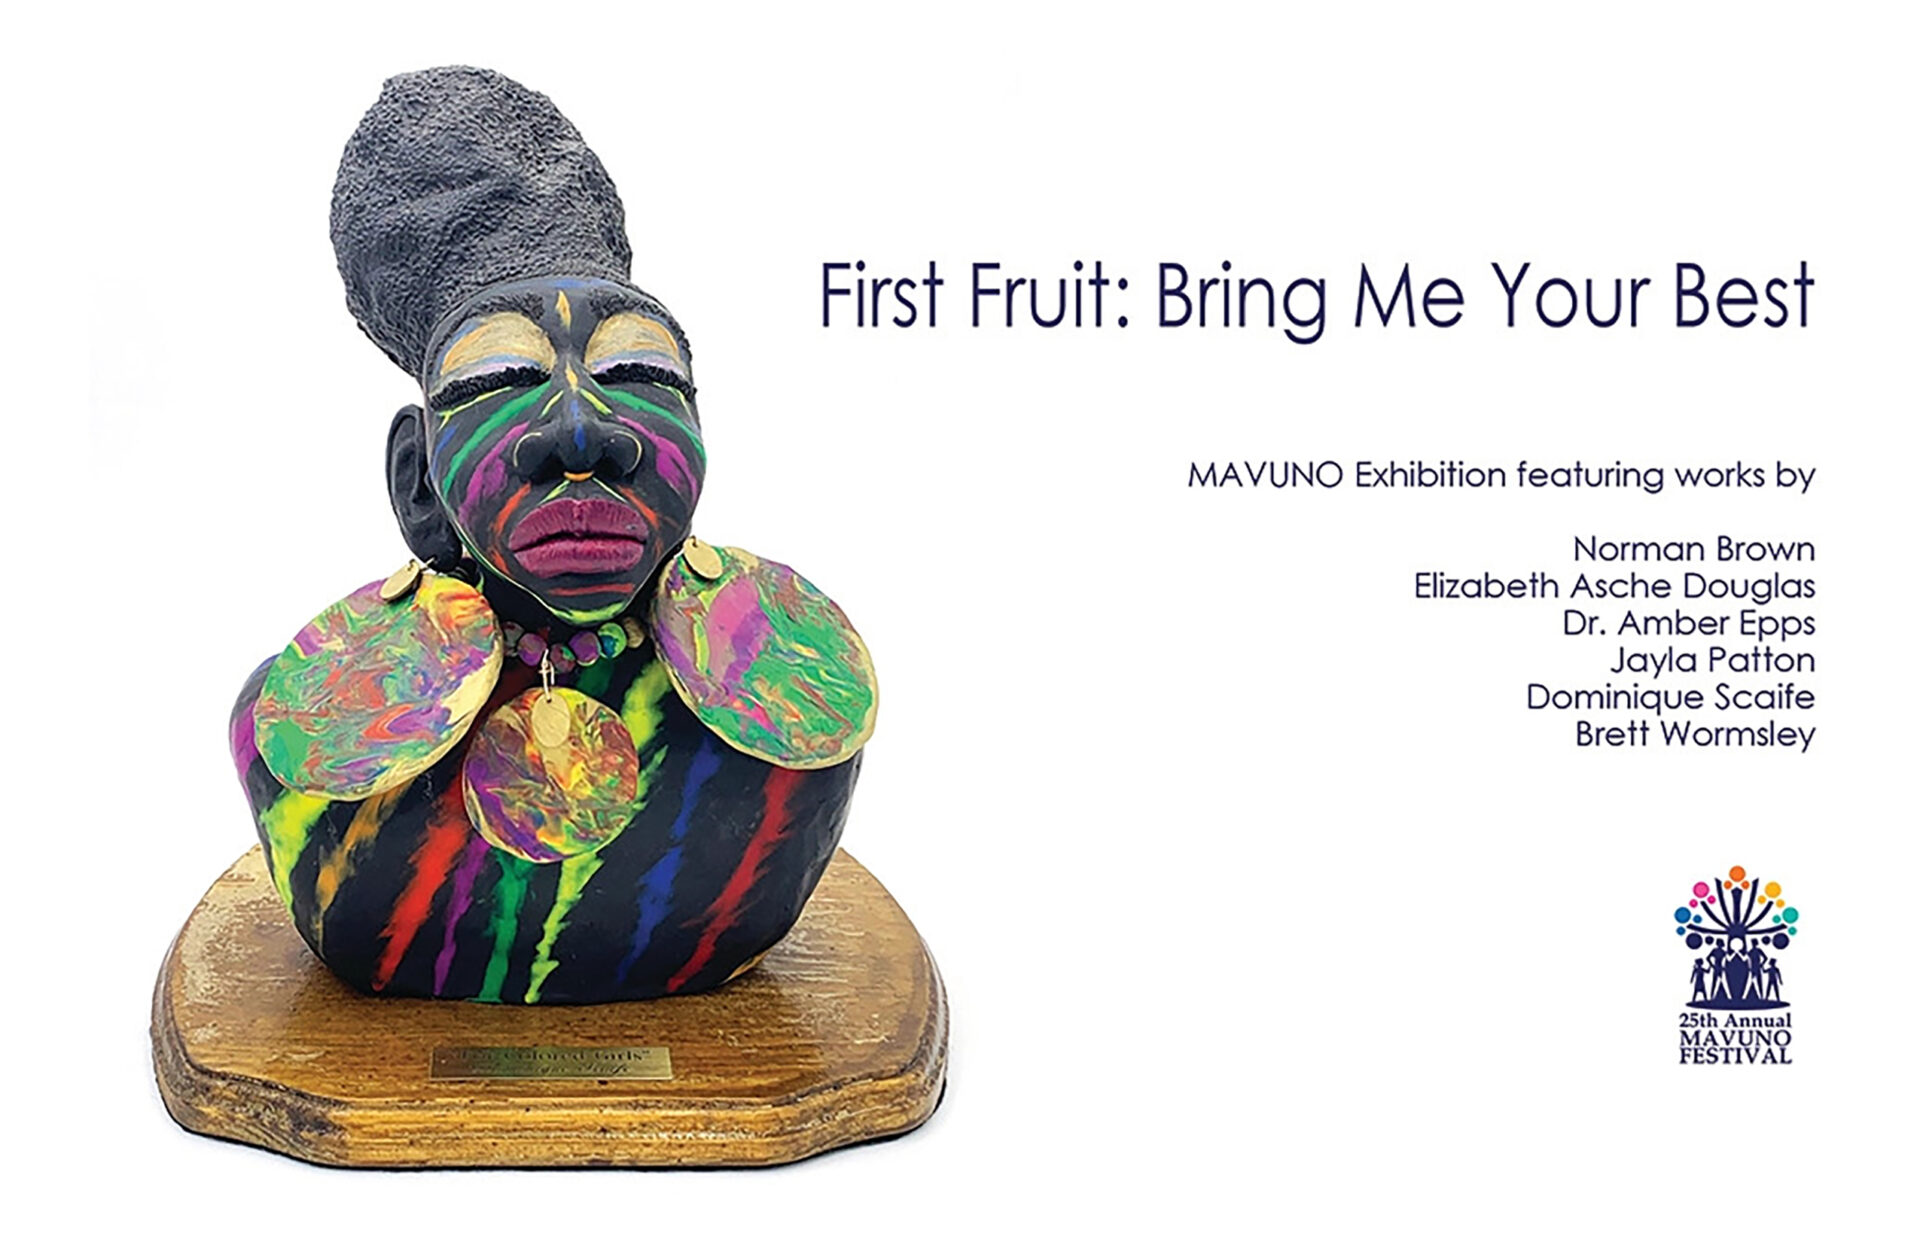 First Fruit: Bring me your Best Exhibit